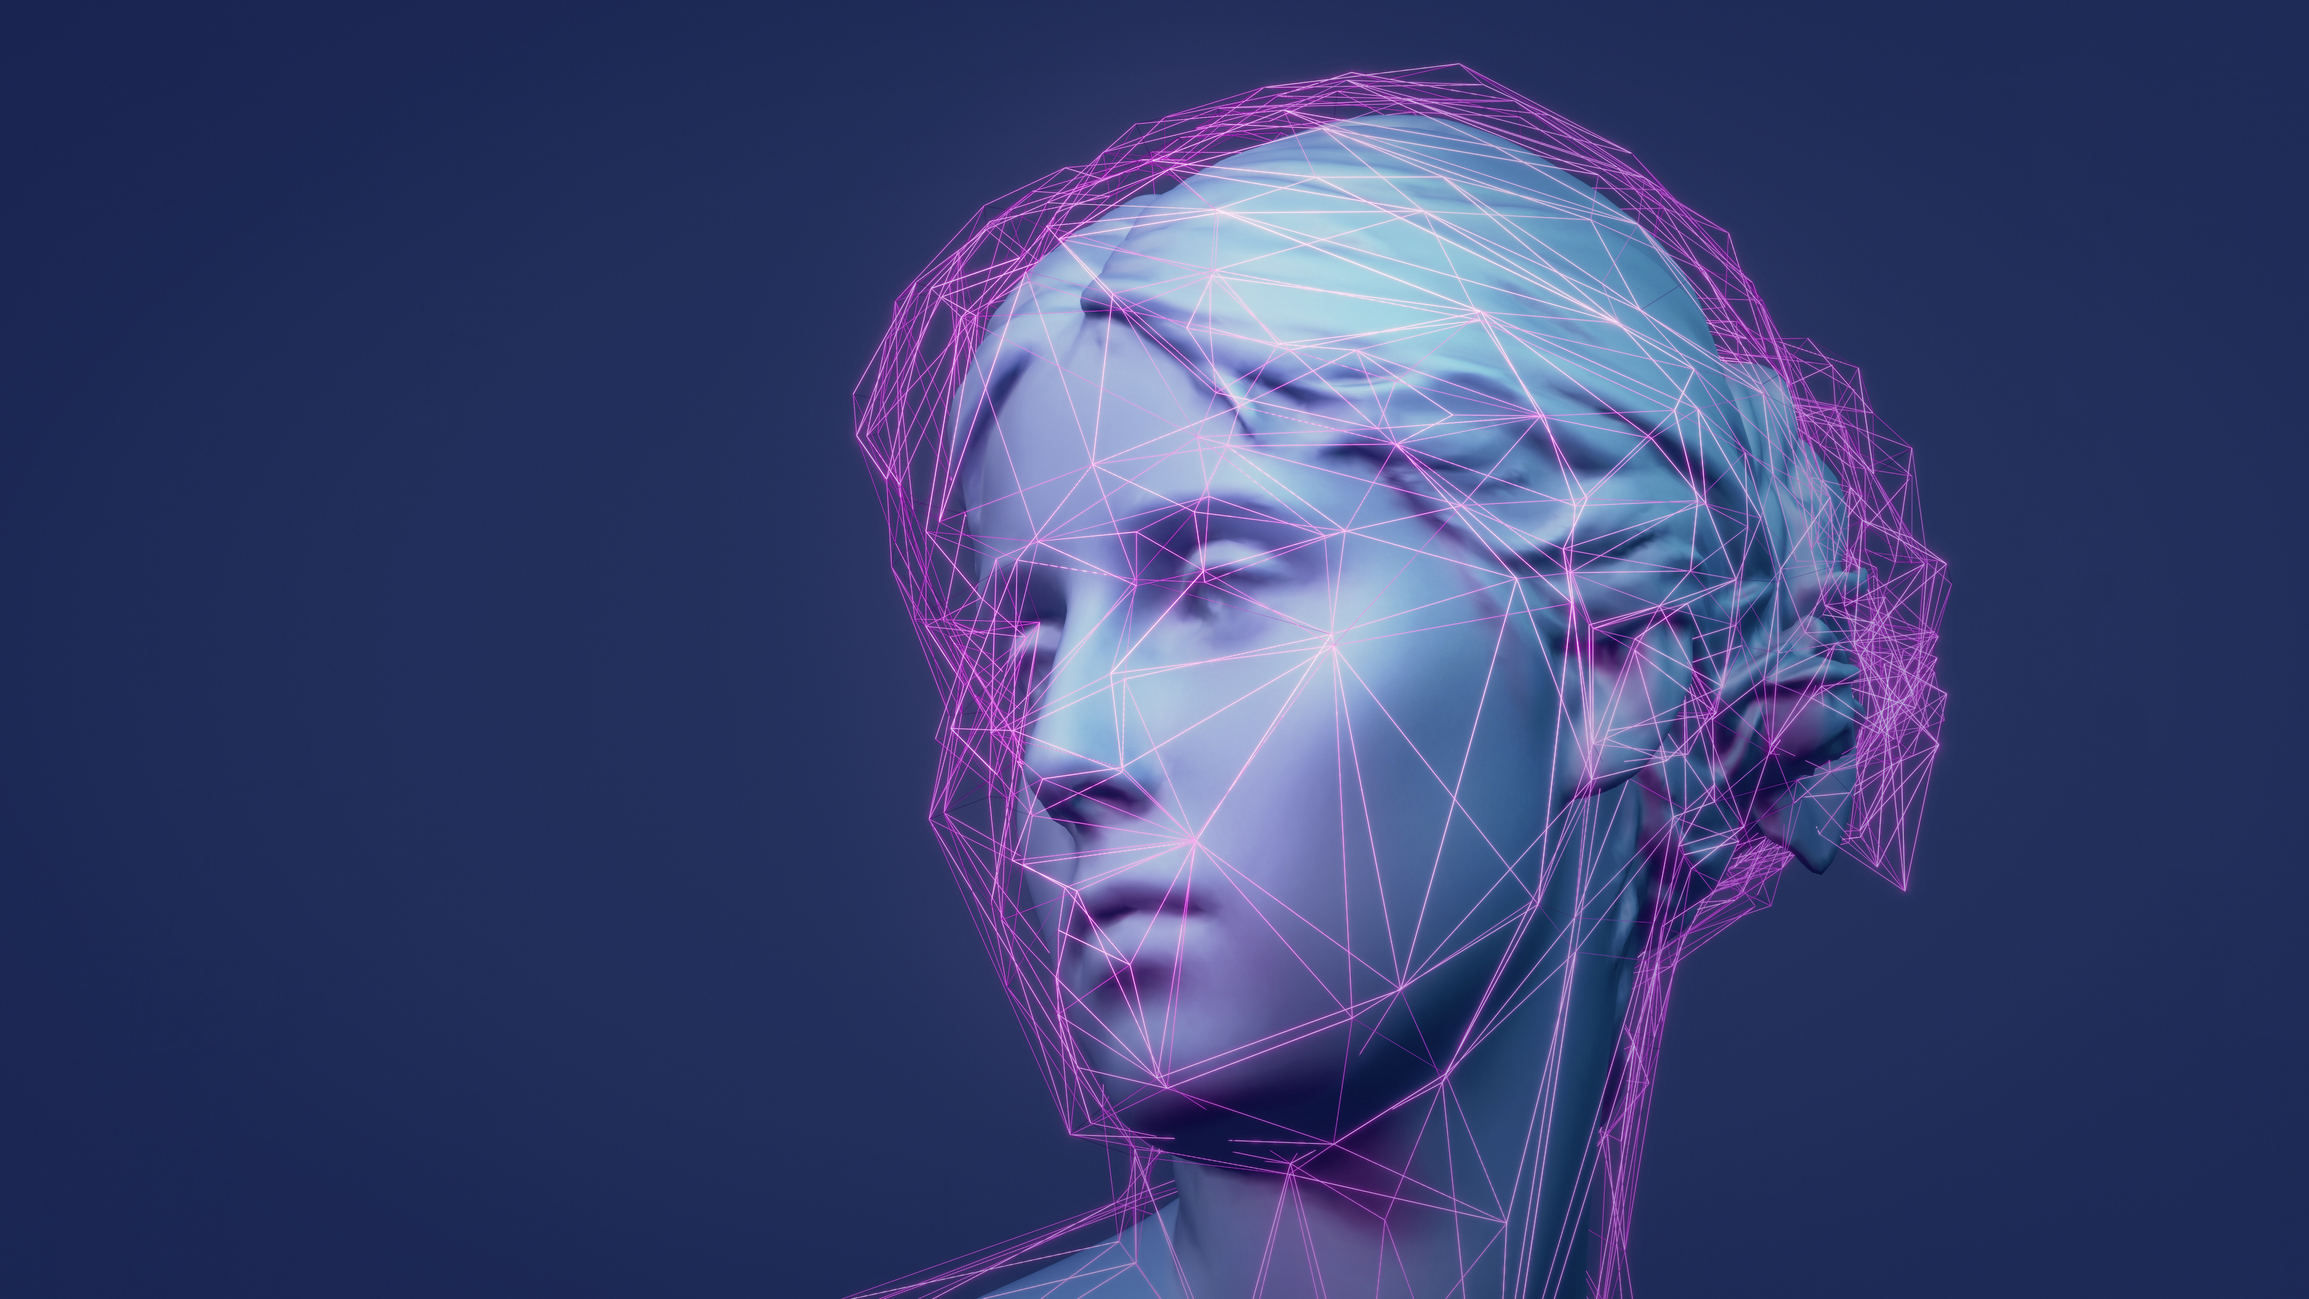 A 3D rendered classic sculptural Metaverse avatar with a mesh of glowing purple lines on low polymer.  Machine learning and artificial intelligence concept.  Animated 3D NFT drawing example.  Web 3.0 technology infrastructure.